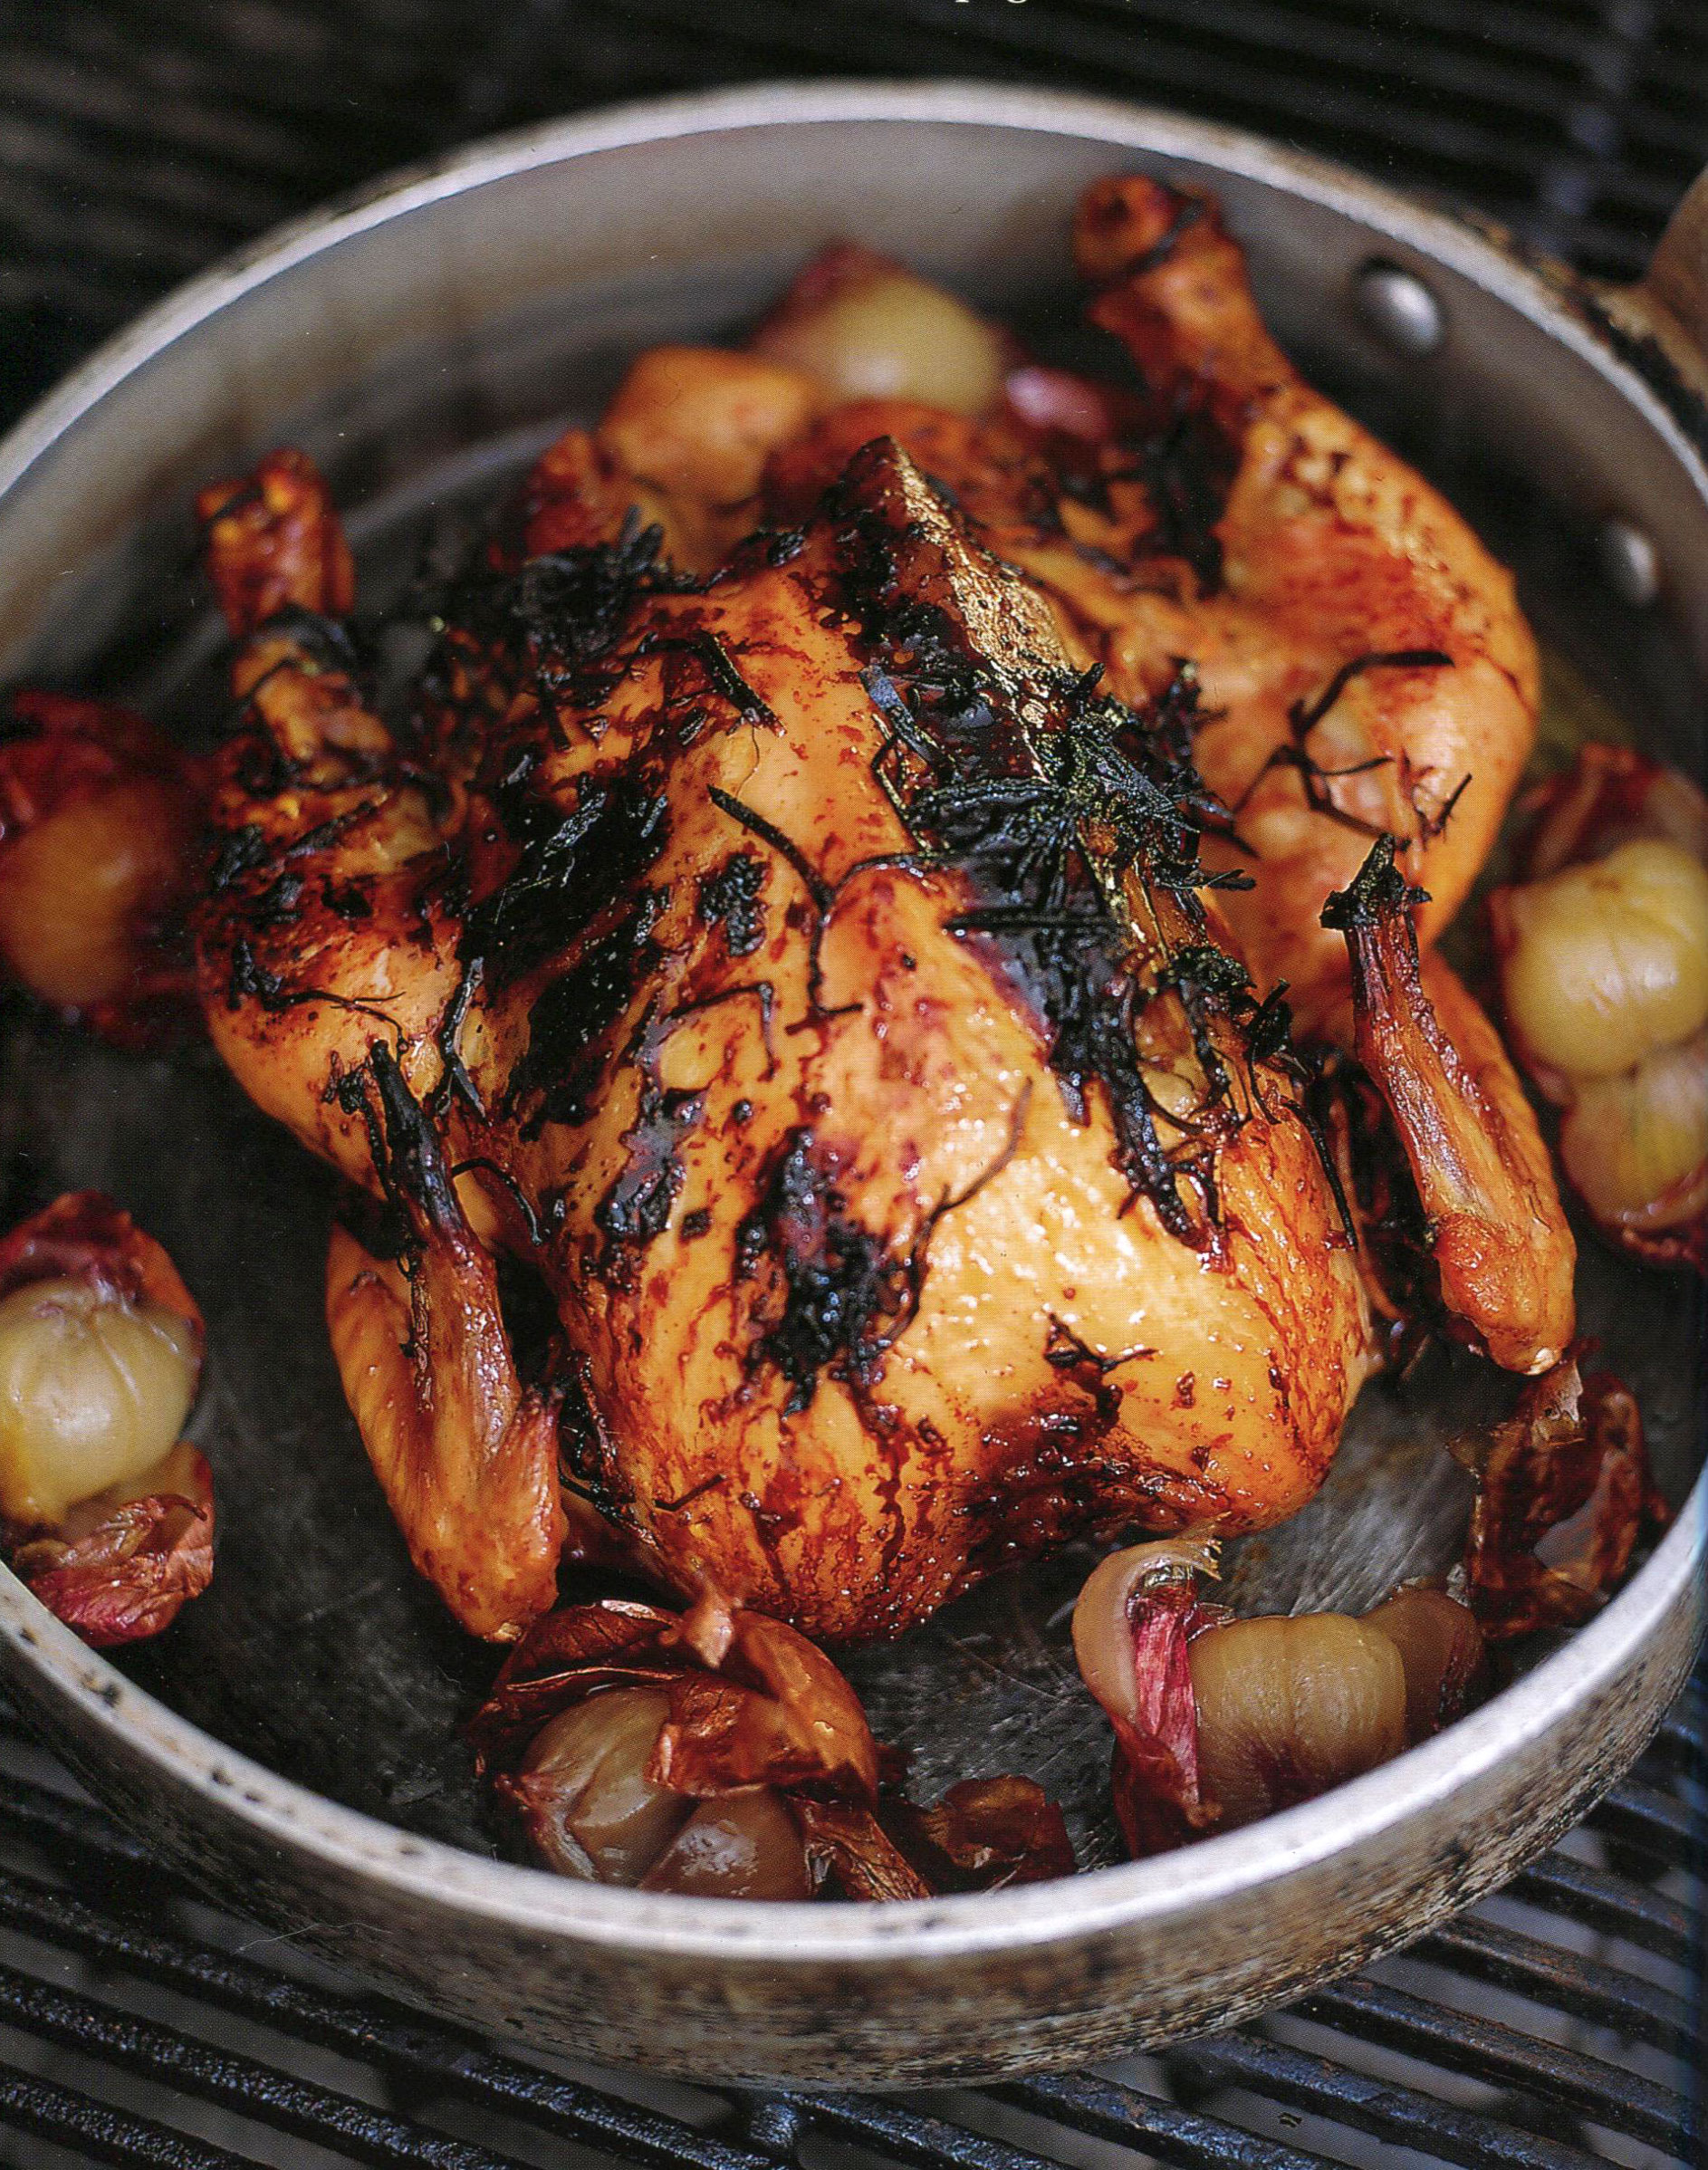 TBT Recipe: Lemongrass and Lemon Roasted Chicken from Arrows